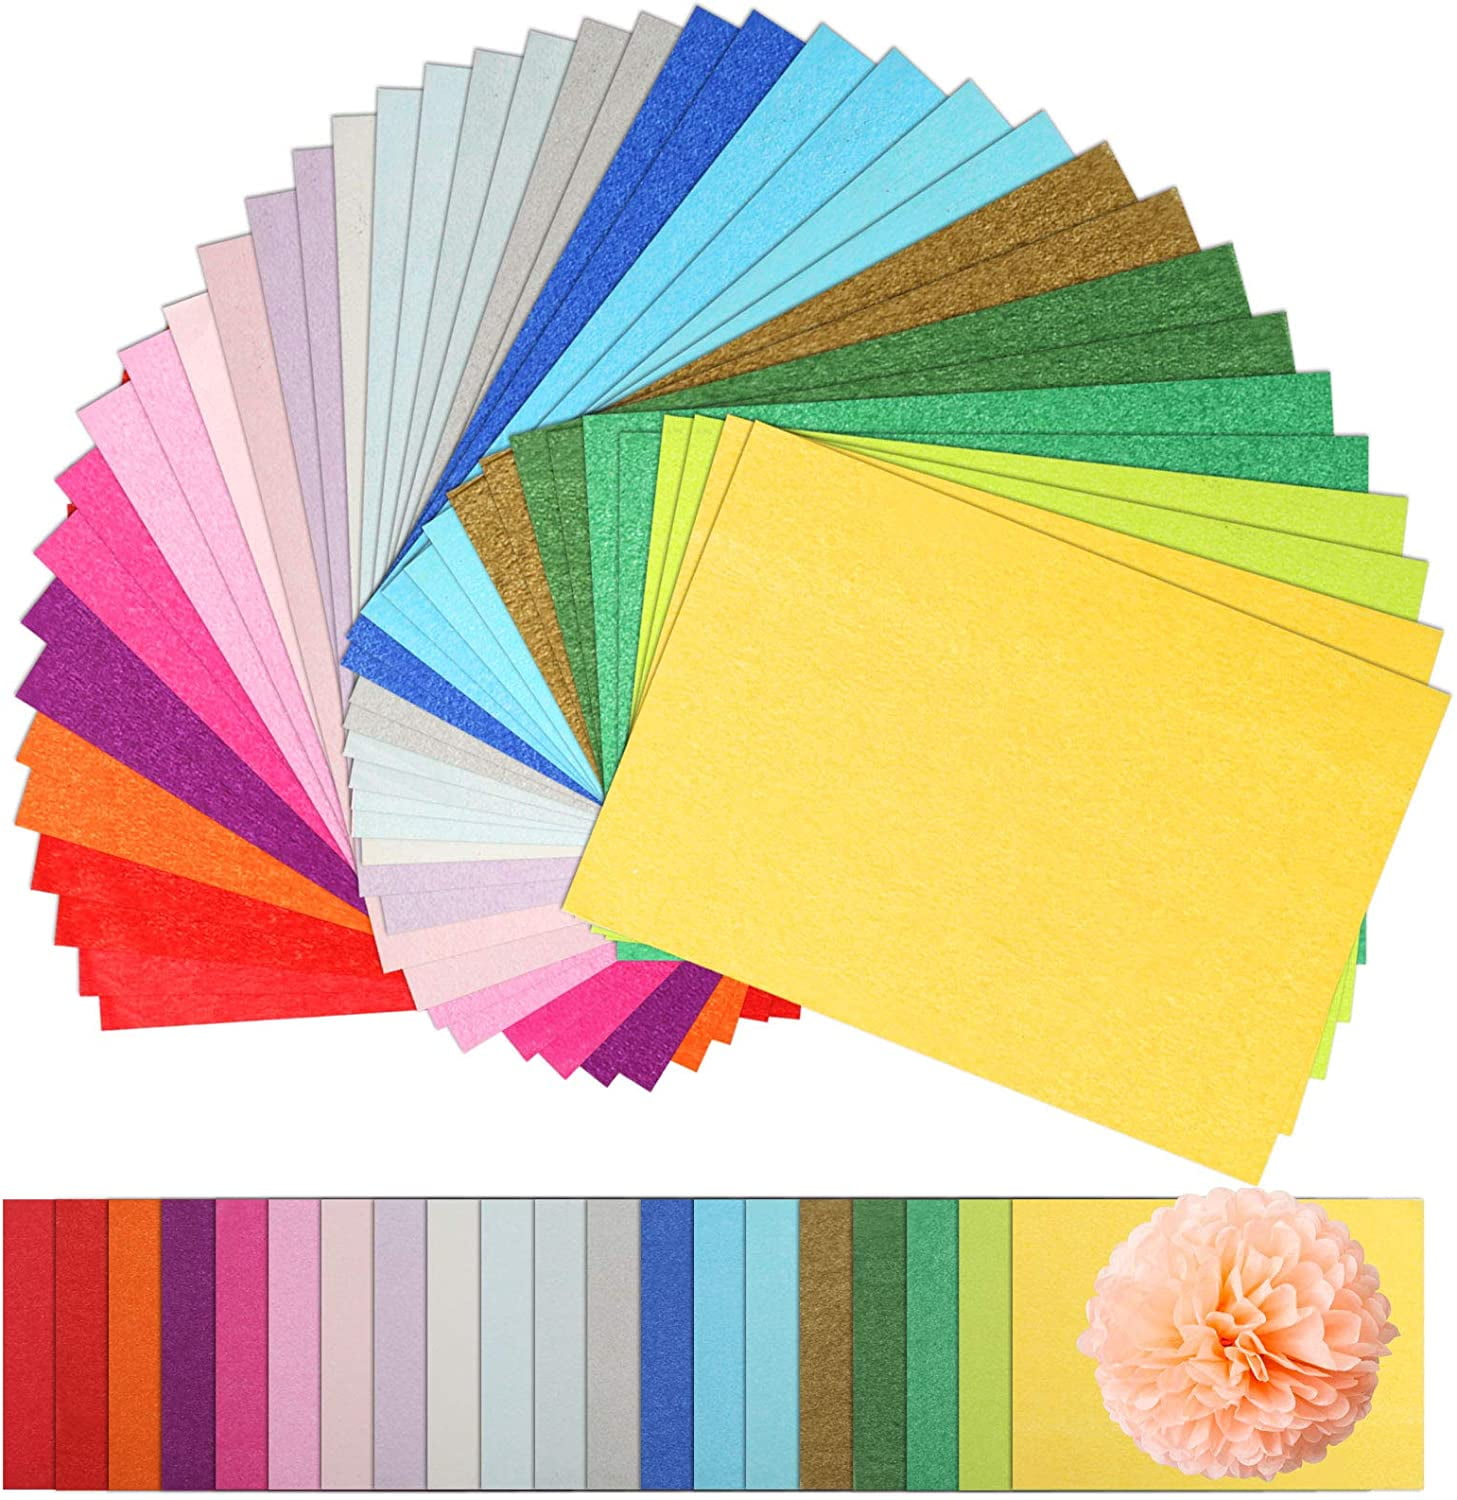  Naler 200 Sheets Art Tissue Paper Bulk for Gift Bags Gift  Wrapping Tissue Paper for Crafts Decorative Tissue Paper Flower Pom Pom in  20 Assorted Colors, 8X11 : Arts, Crafts 